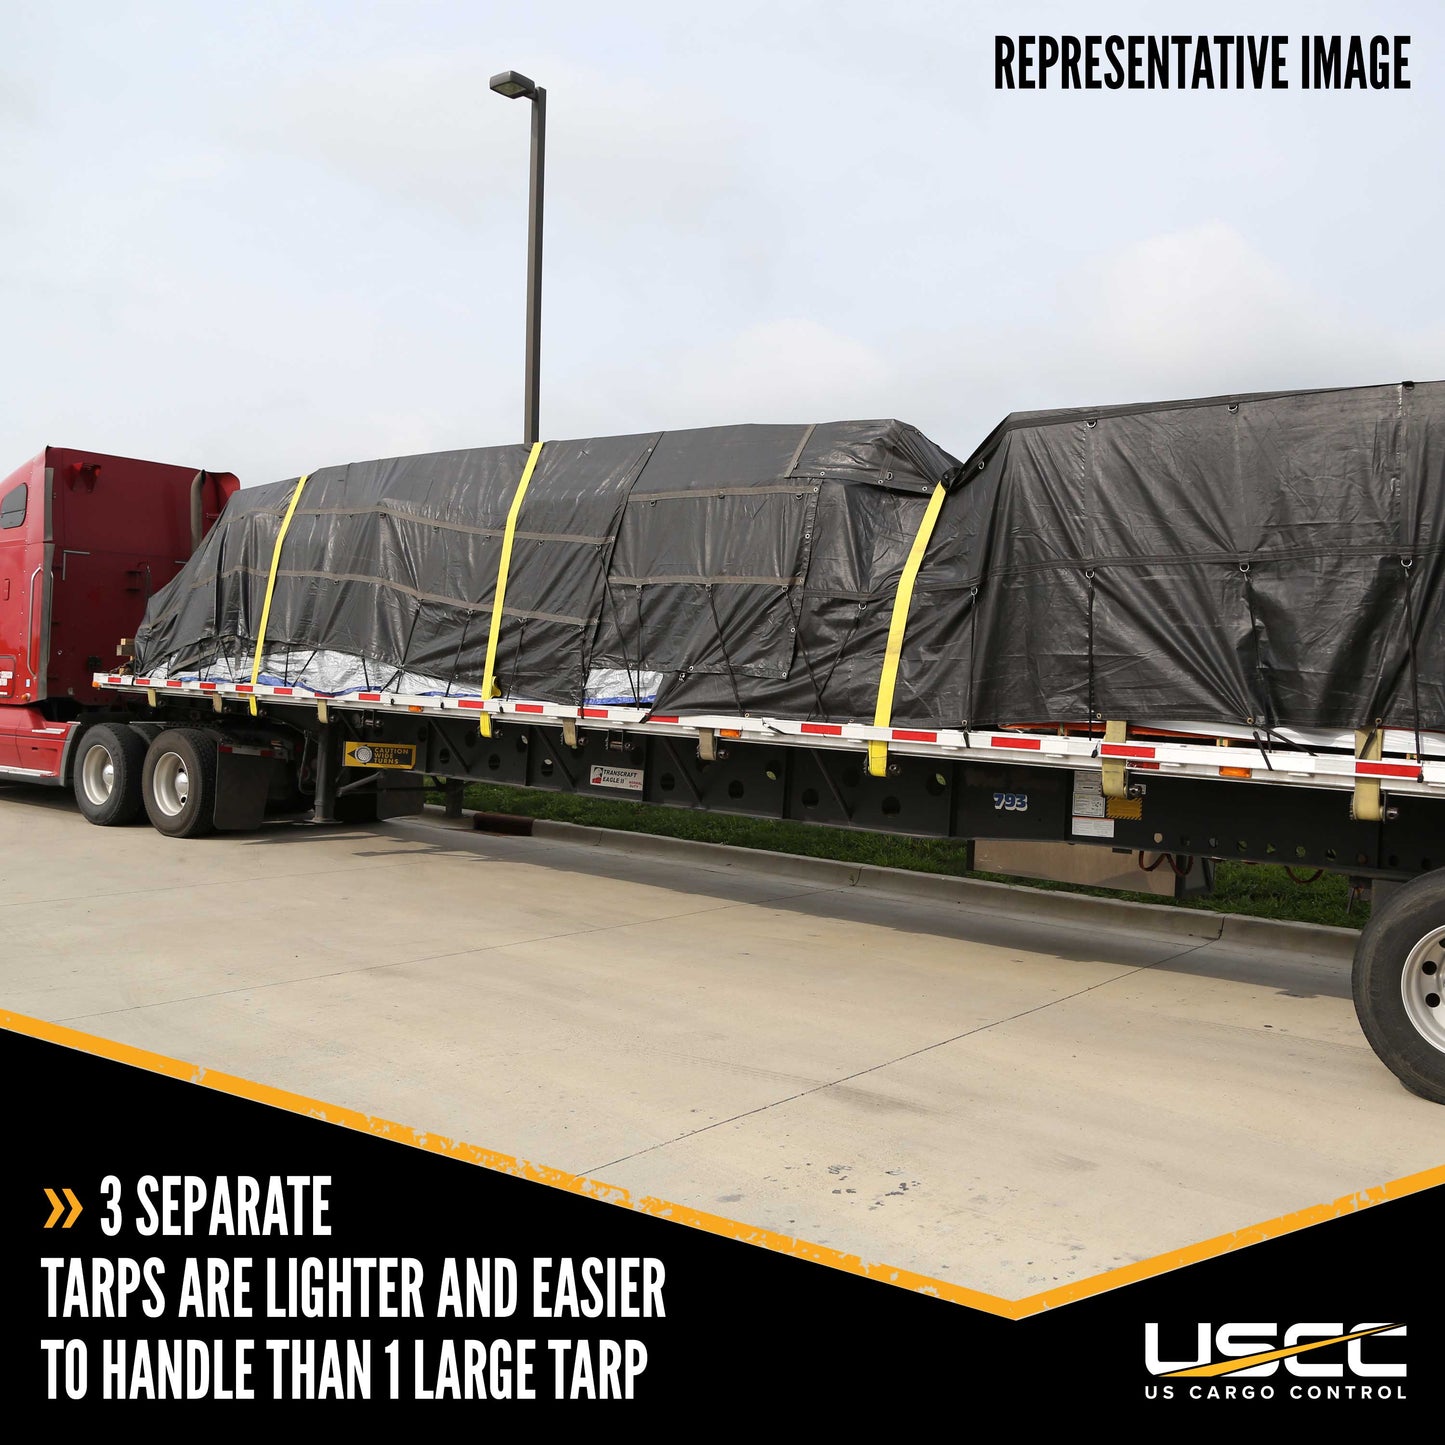 18 oz 3 Piece Lumber Tarp 20 foot x 18 foot (6 foot Drop) for all 3 pieces Black image 9 of 10